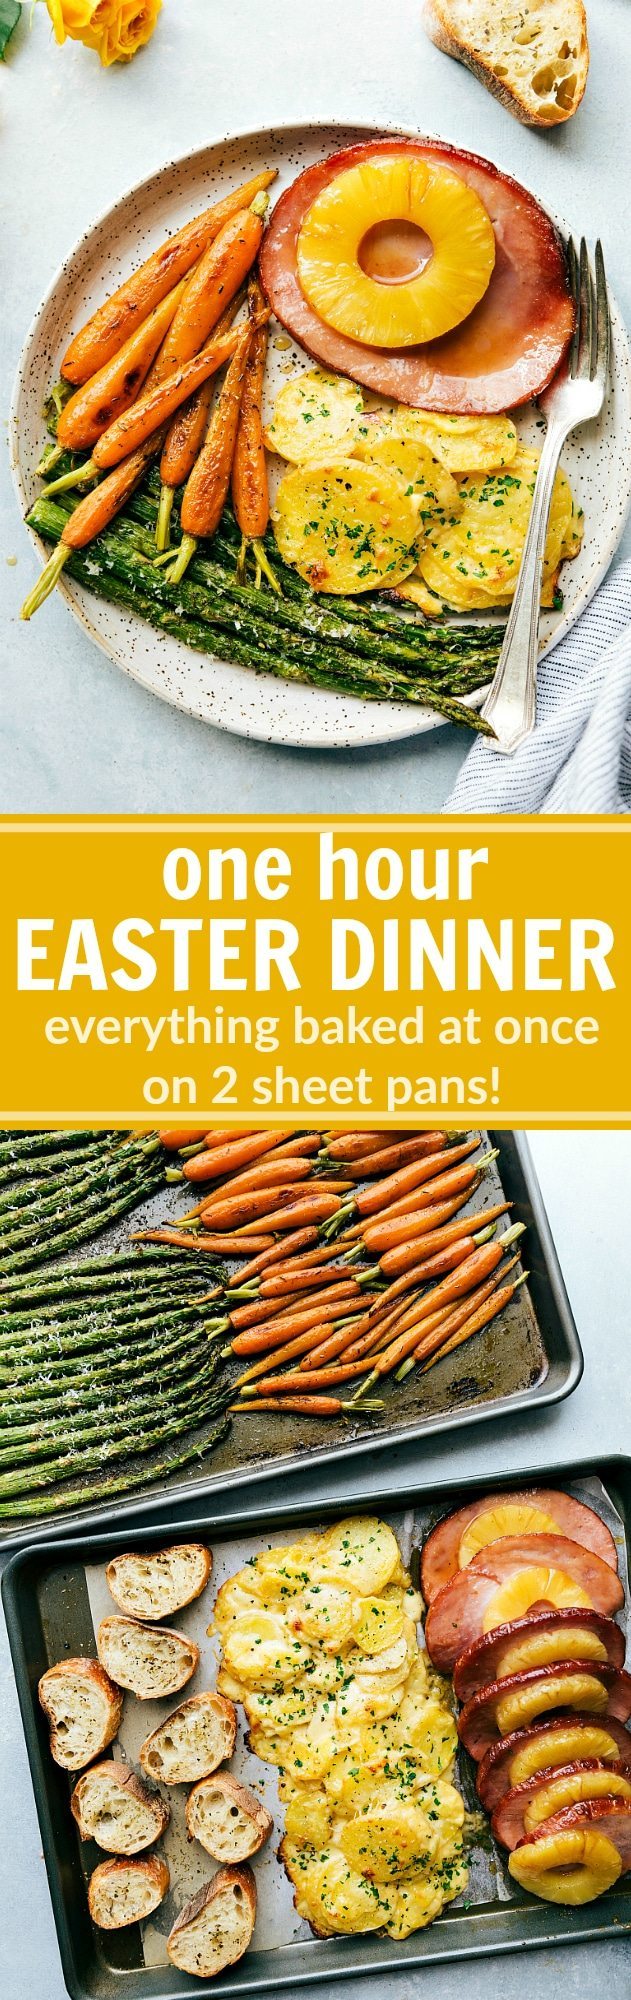 An ENTIRE Easter Dinner made in under an hour! Two sheet pans hold all the food that is baked at the same time!! This Sheet Pan Easter Dinner consists of: roasted Parmesan asparagus, honey-butter roasted carrots, pineapple brown sugar ham, cheesy au gratin potatoes, and a toasted baguette. via chelseasmessyapron.com